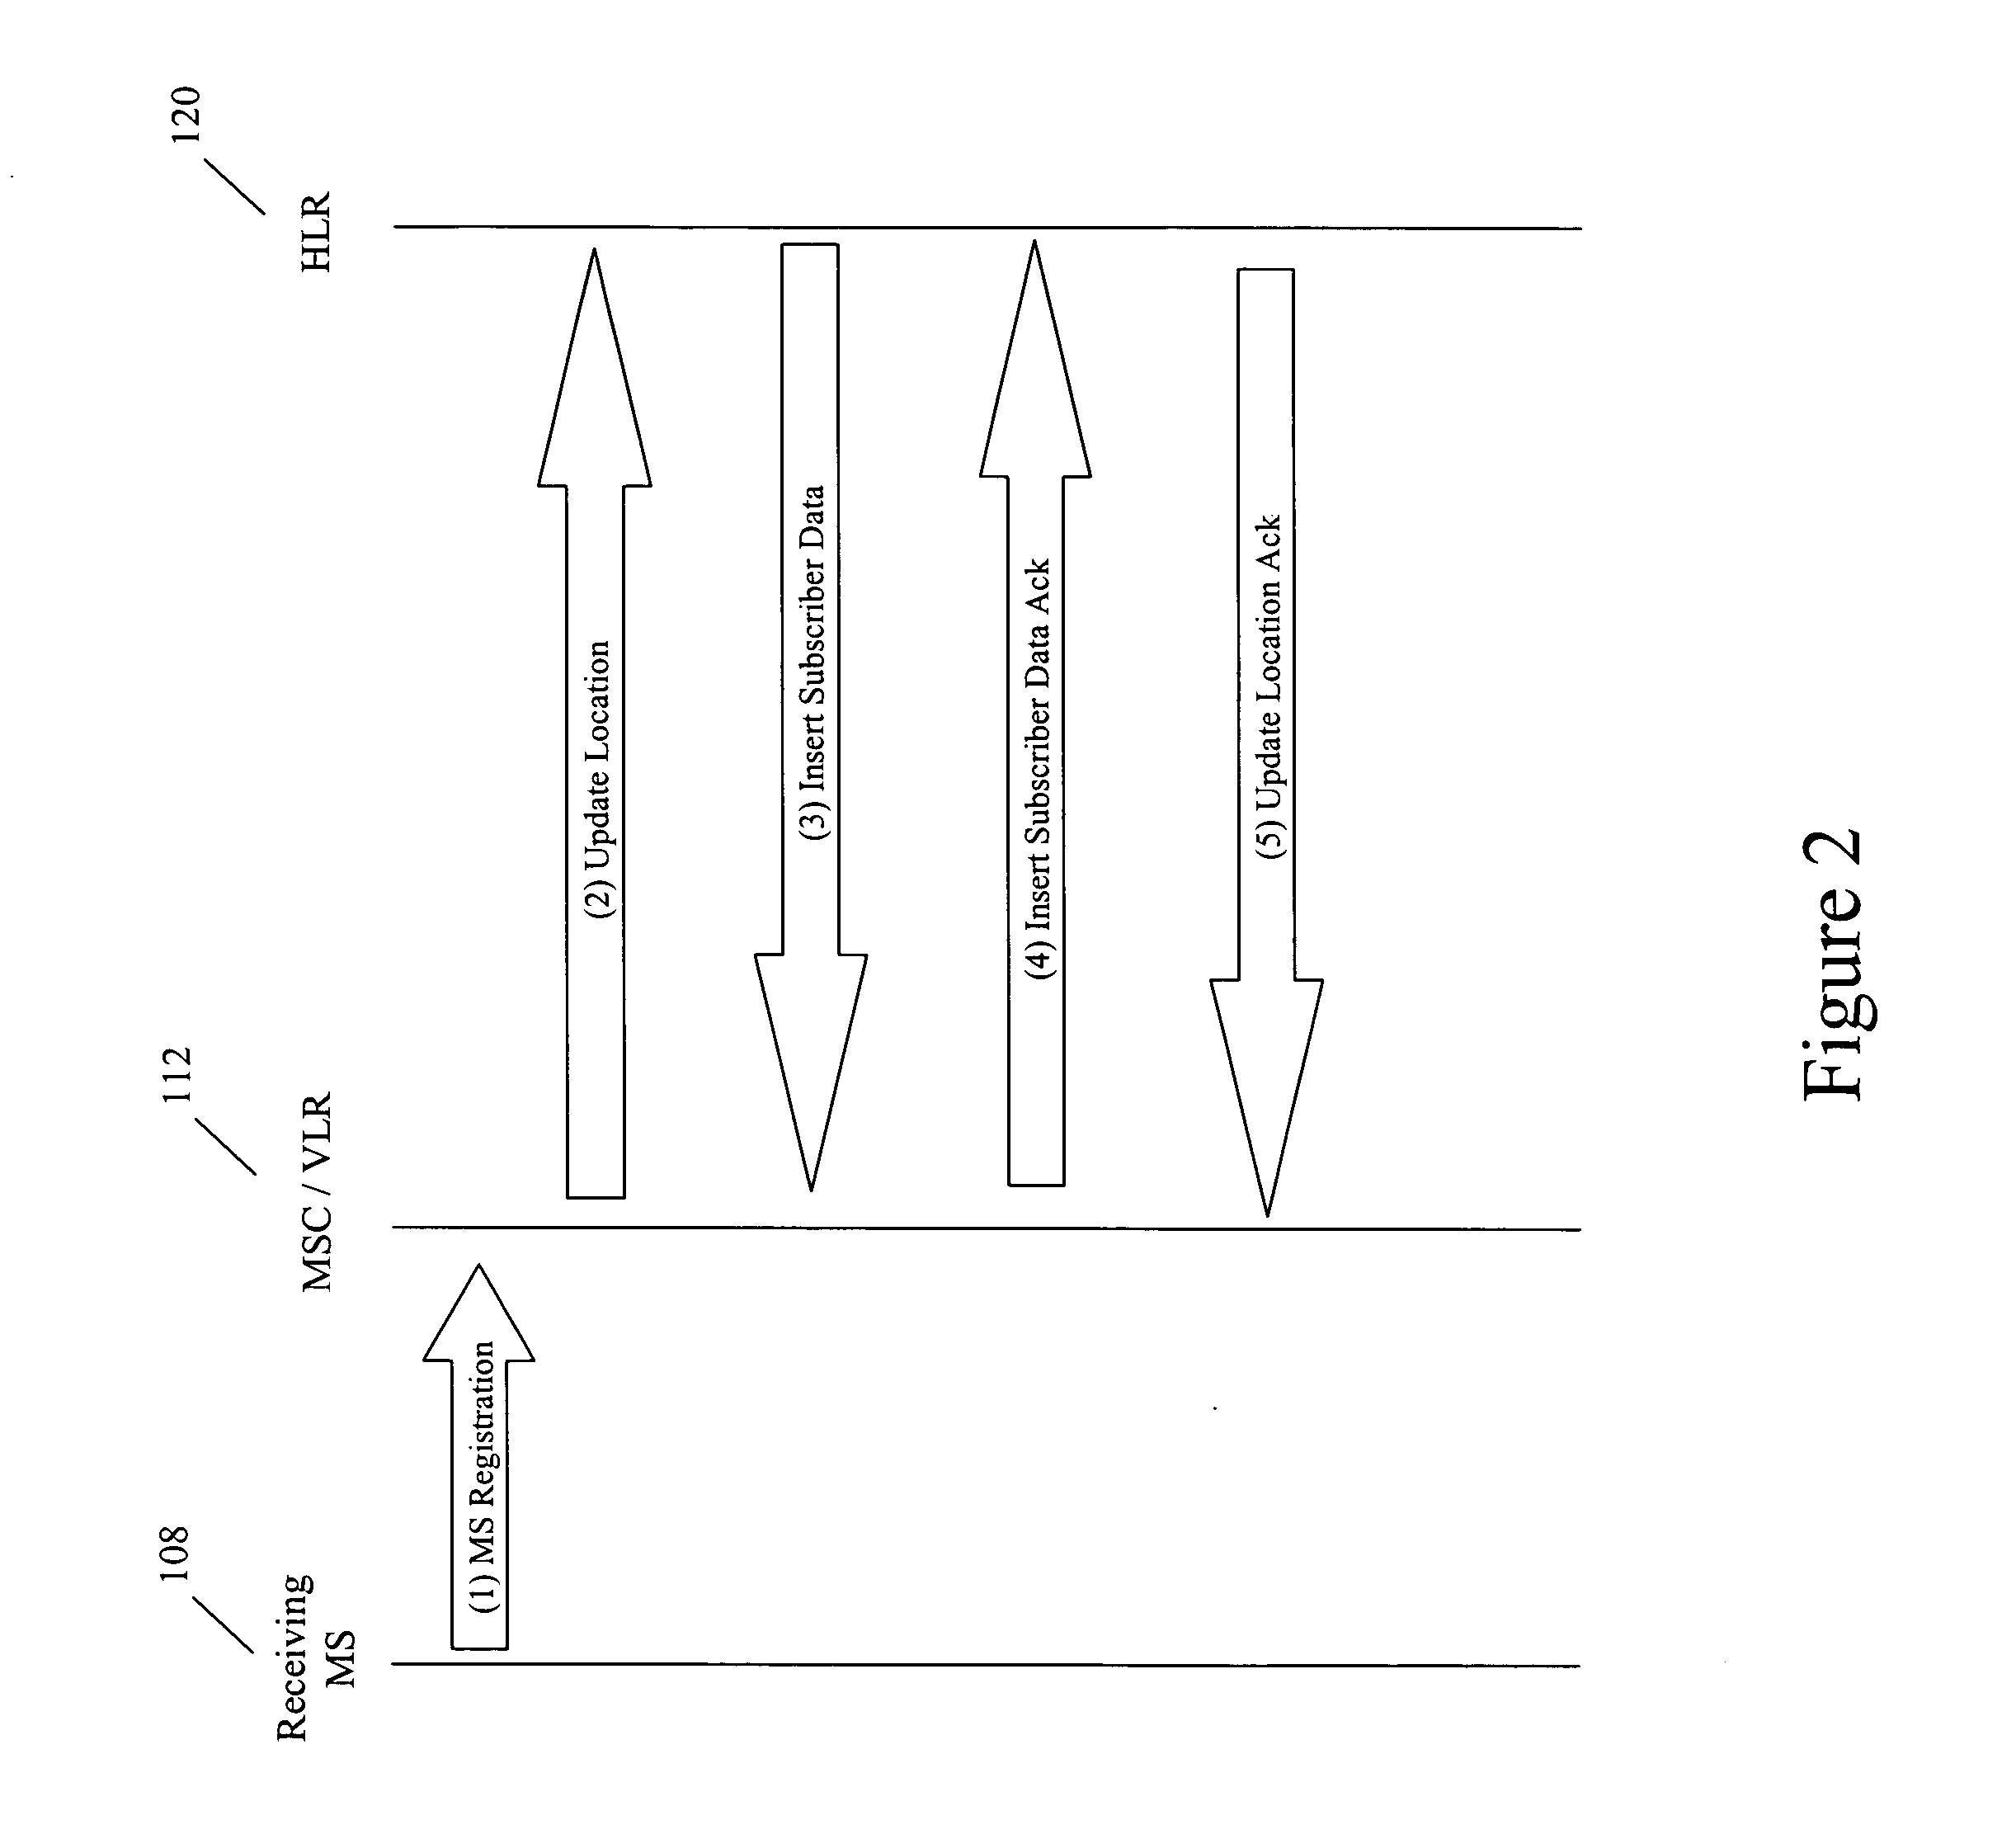 Methods, systems, and computer program products for delivering messaging service messages